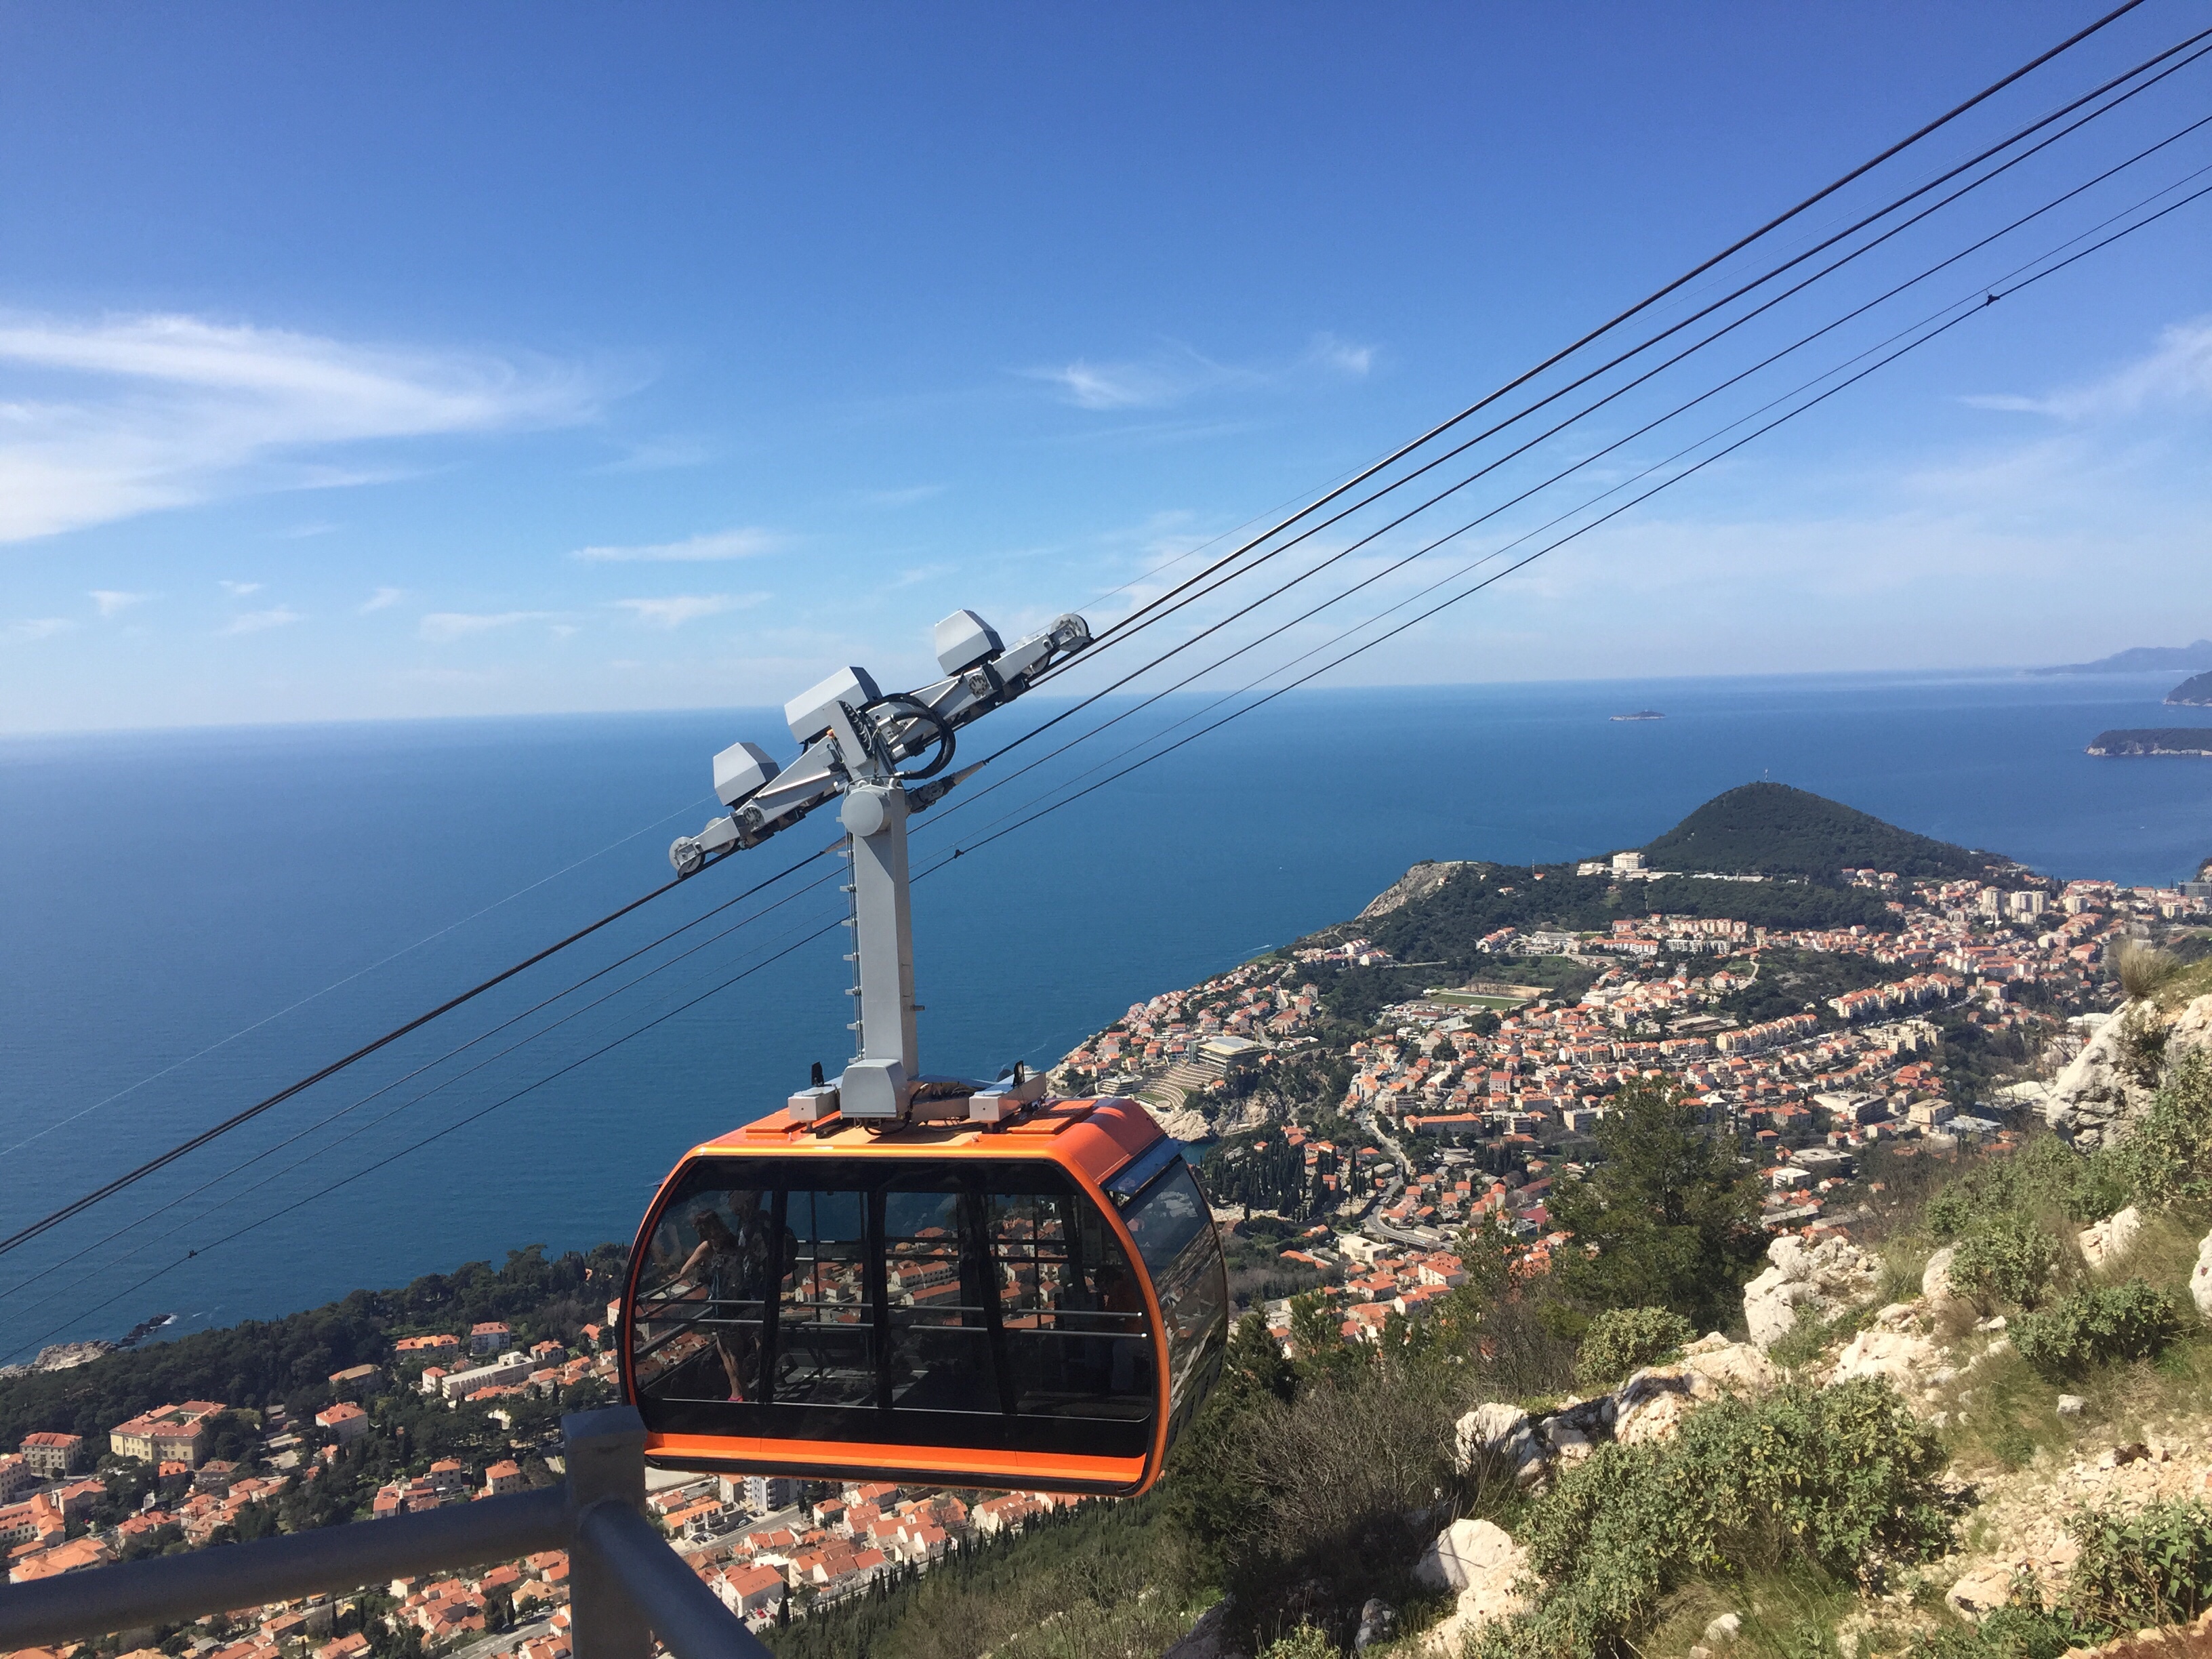 The Dubrovnik cable car in Croatia